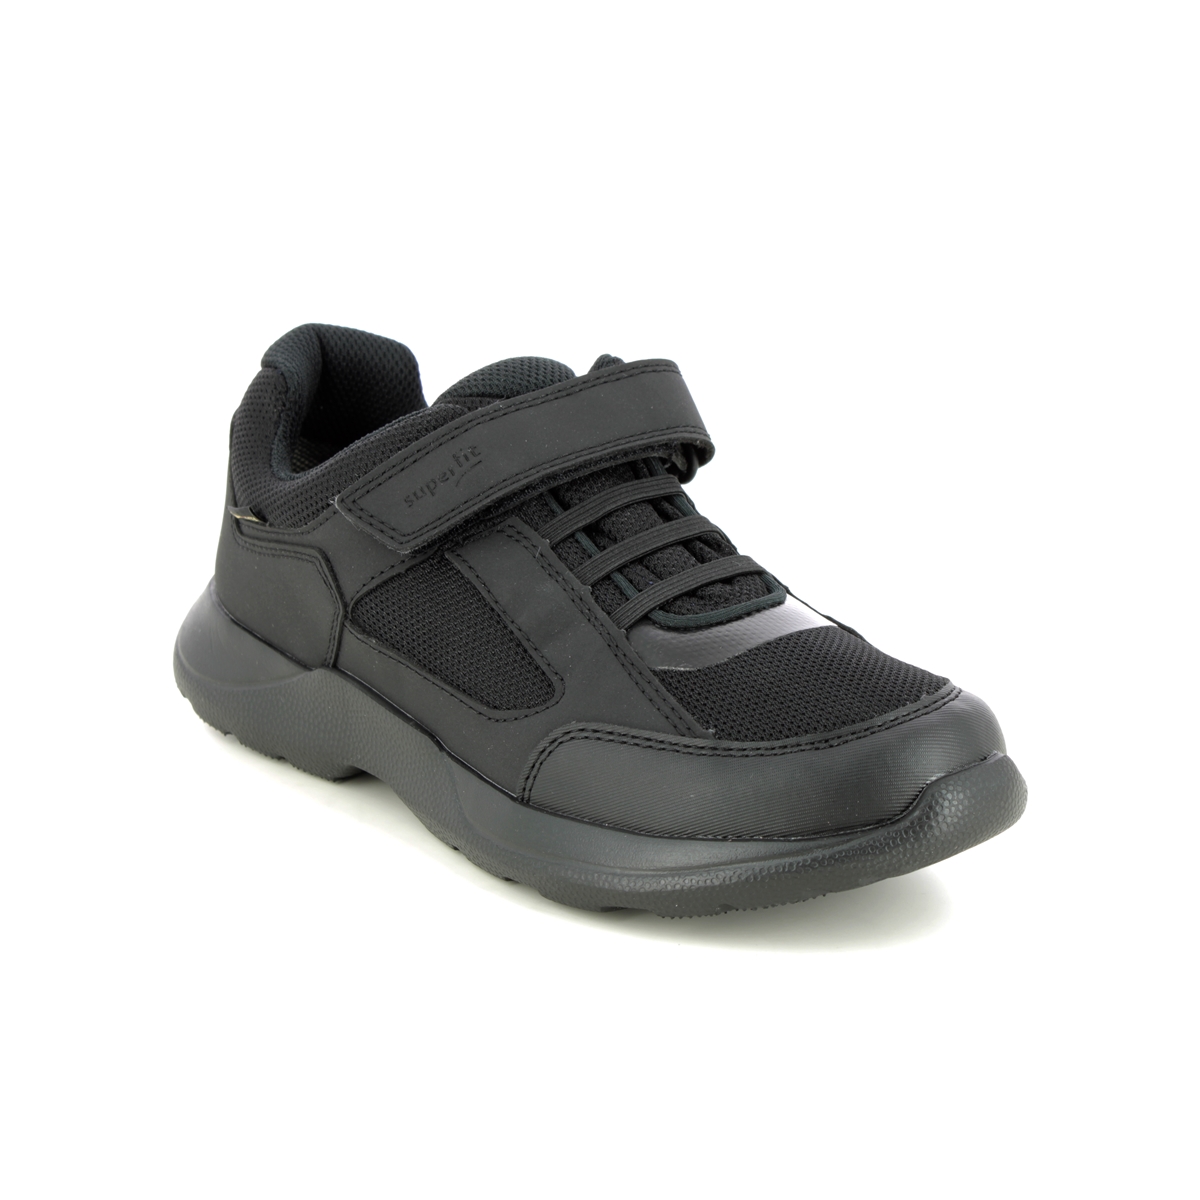 Superfit Rush Gtx Bungee Black Kids Trainers 1006223-0000 In Size 35 In Plain Black For kids